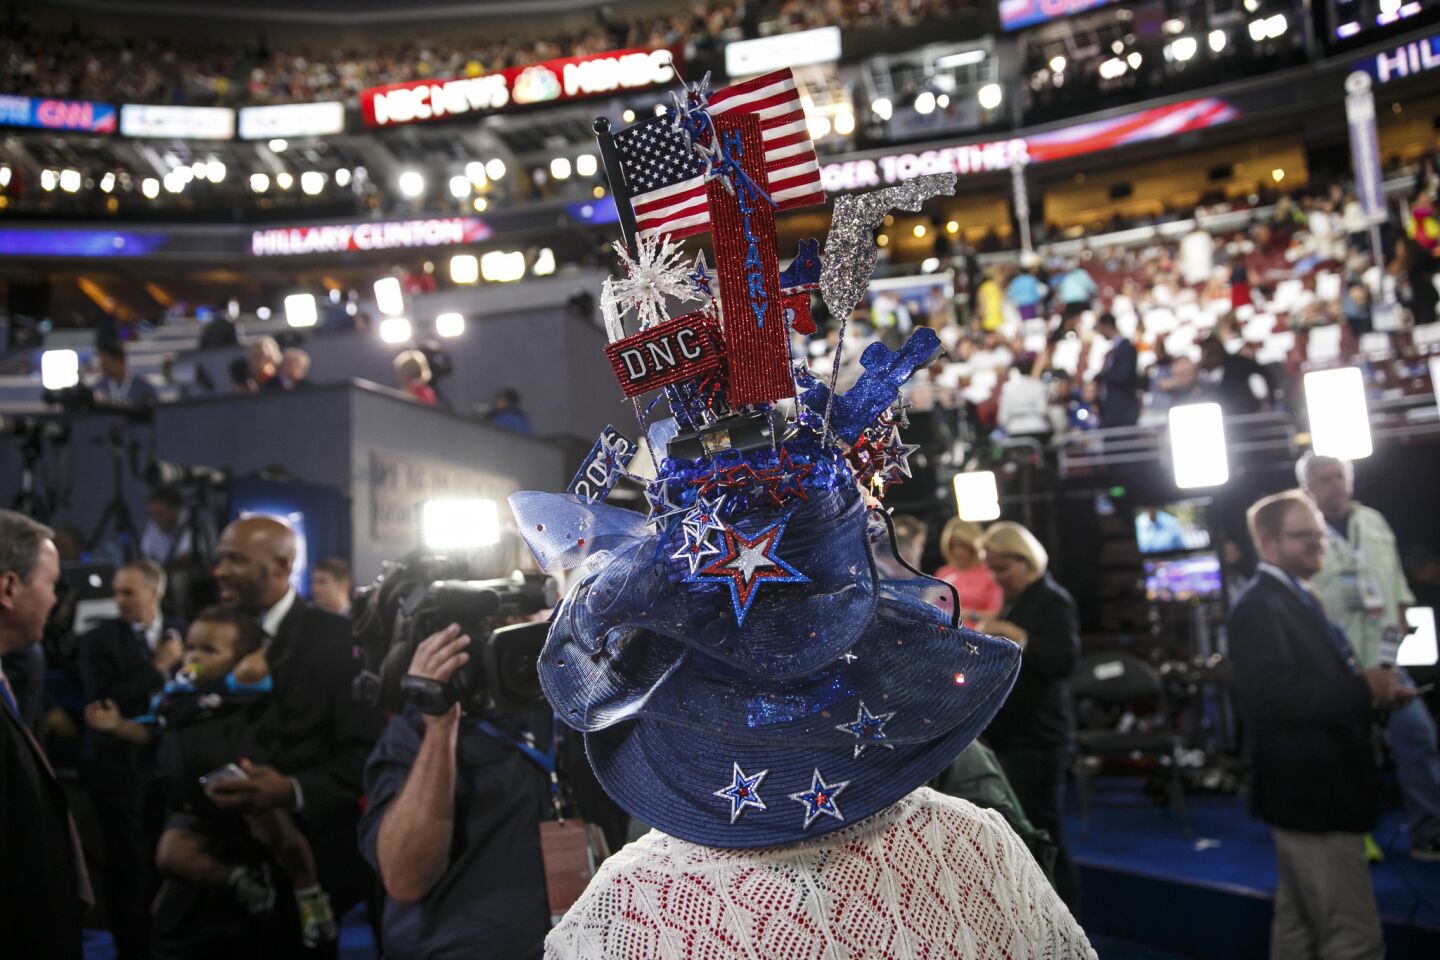 Political fashion styles on the floor of the 2016 Democratic National Convention in Philadelphia.